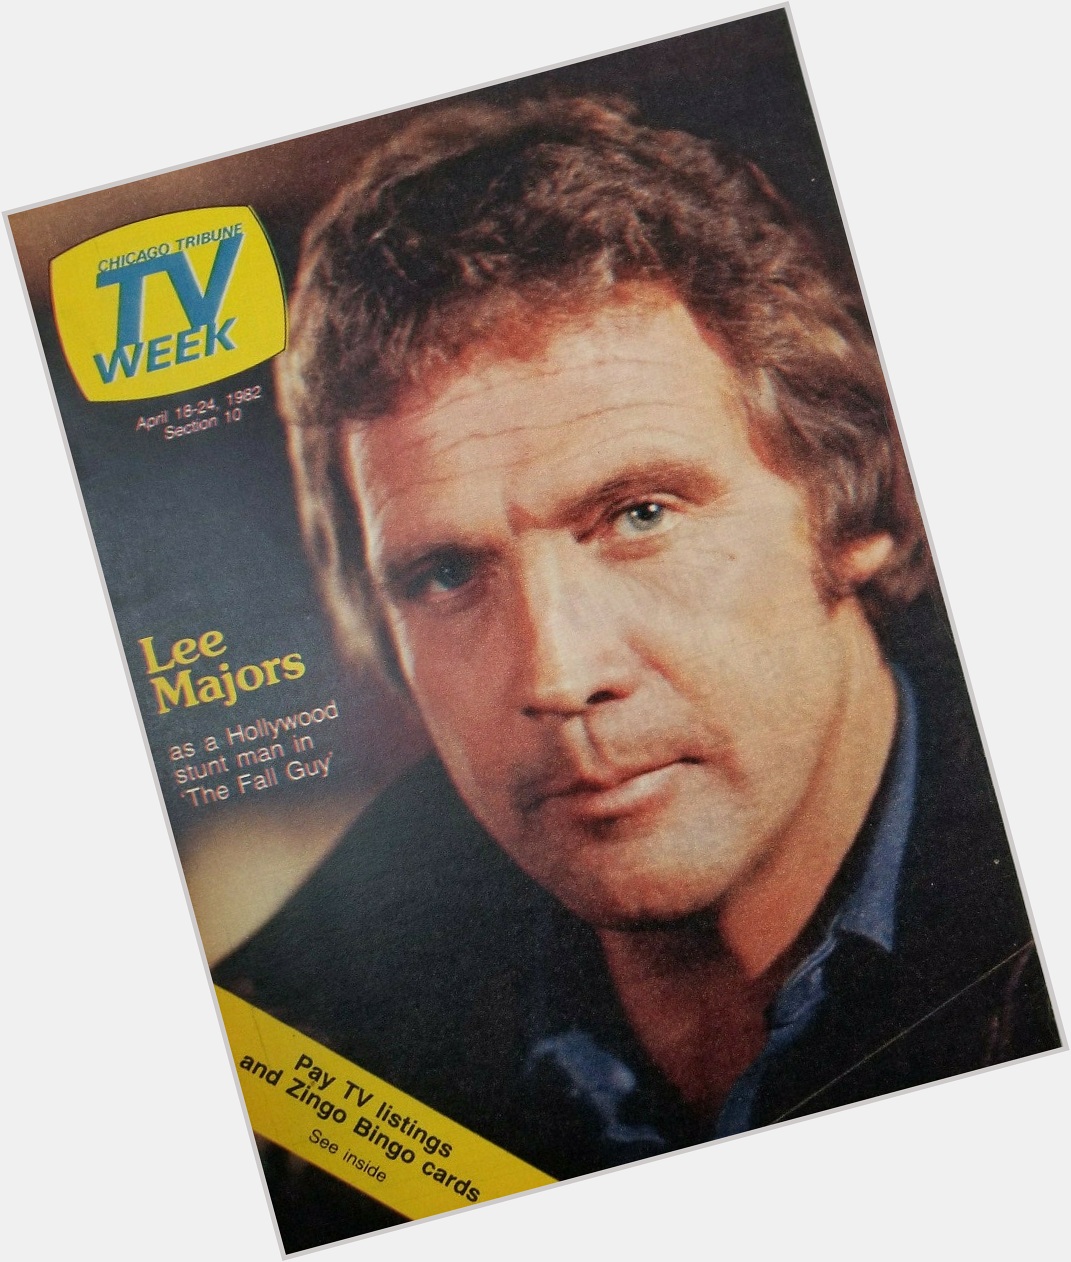 Happy Birthday to Lee Majors, born on this day in 1939
Chicago Tribune TV Week.  April 18-24, 1982 